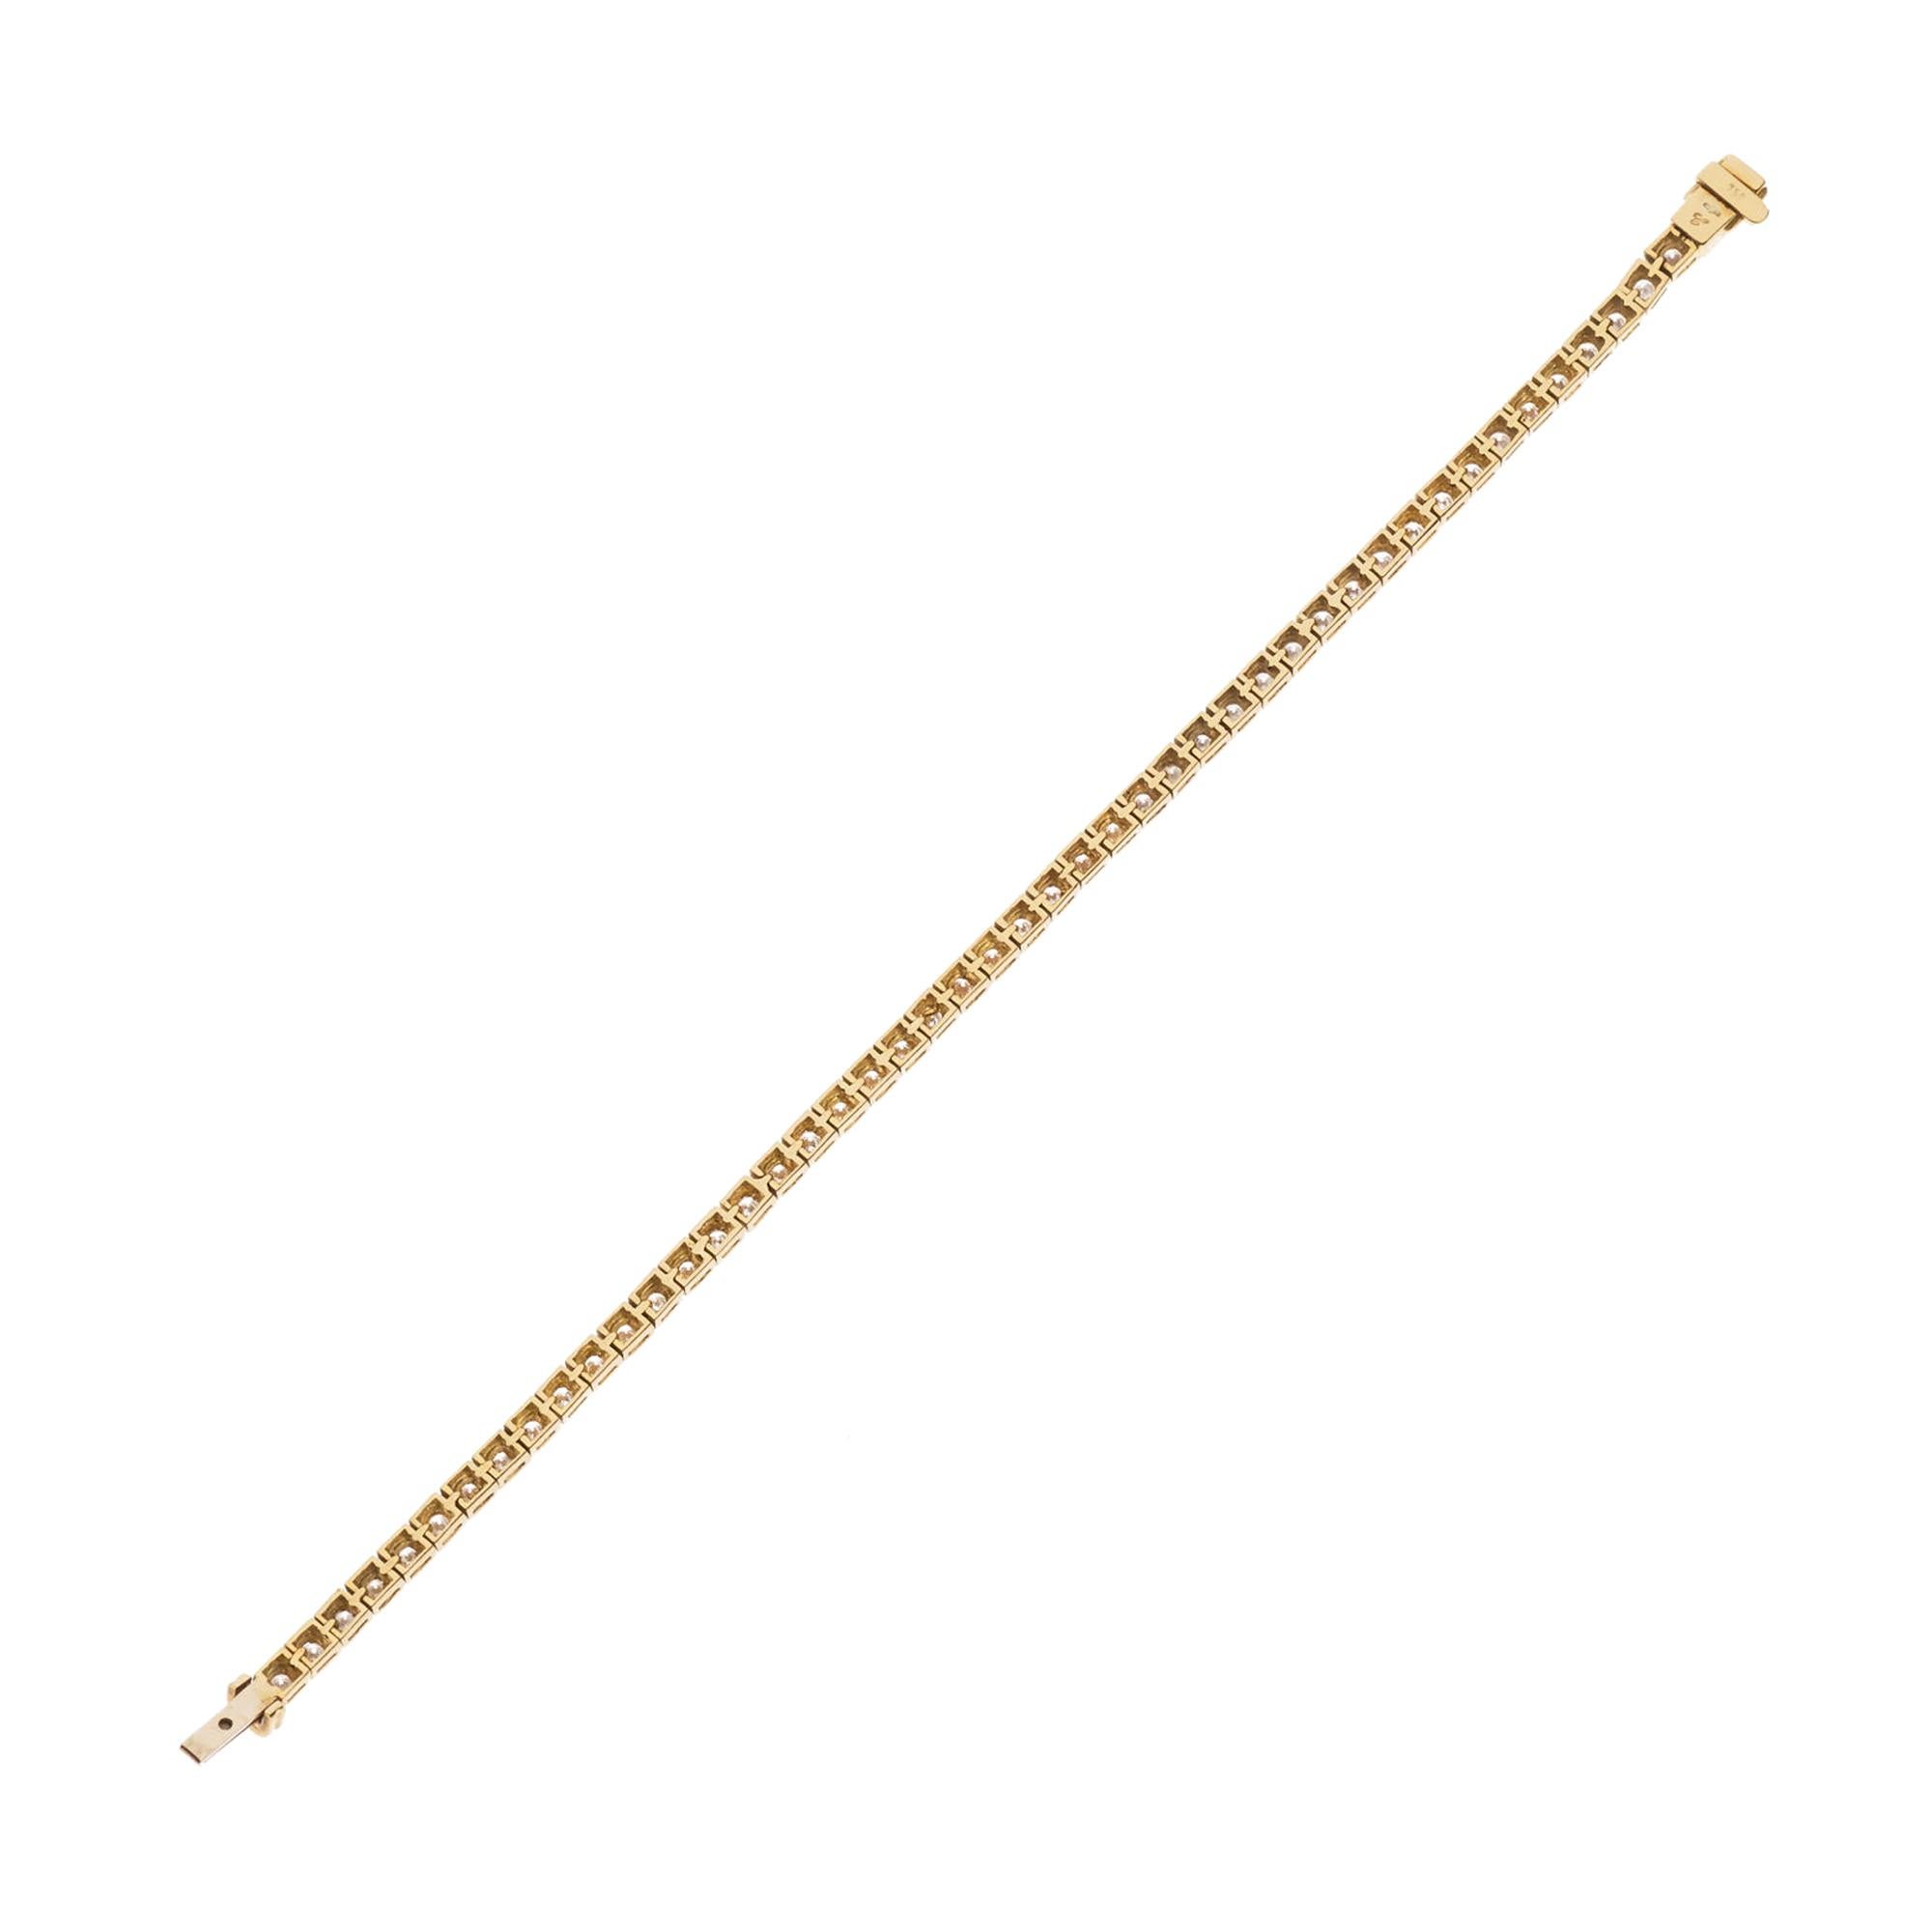 The Chopard diamond tennis bracelet in 18k yellow gold is an emblem of sophistication and timeless elegance, a masterpiece designed for those who appreciate the finer things in life. This exquisite piece harmoniously blends the lustrous warmth of